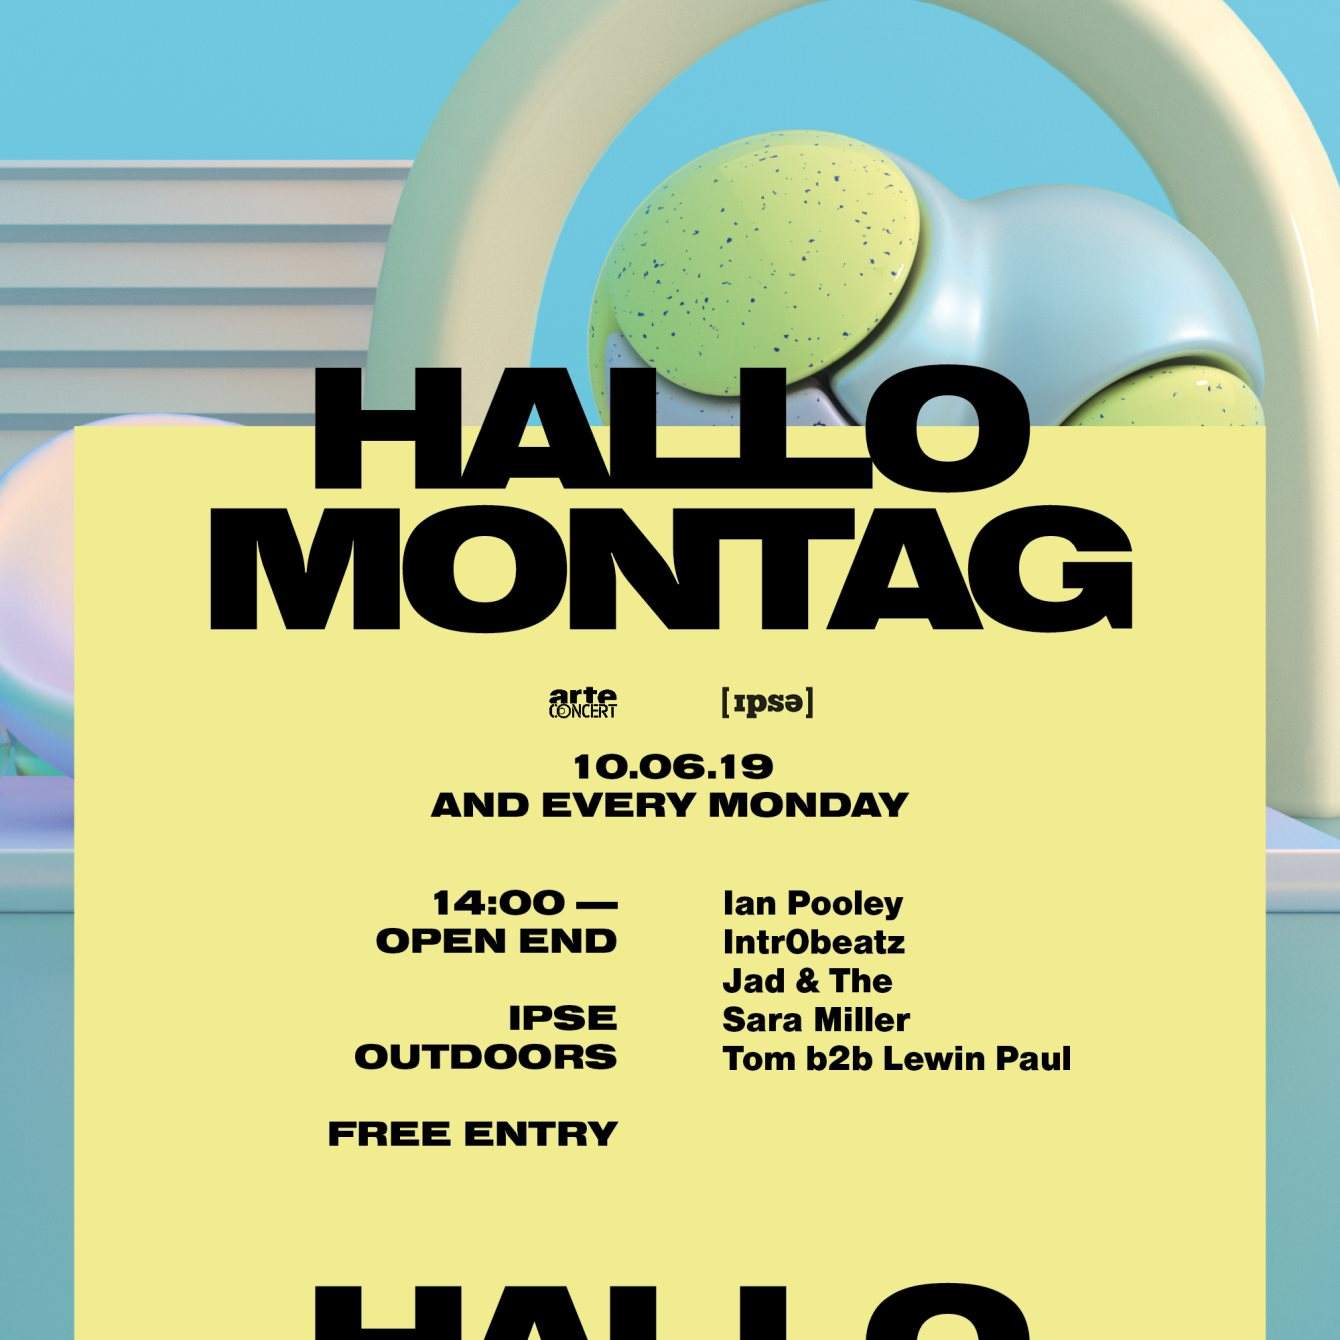 Hallo Montag - Open Air #07 with Ian Pooley, intr0beatz and More - フライヤー表